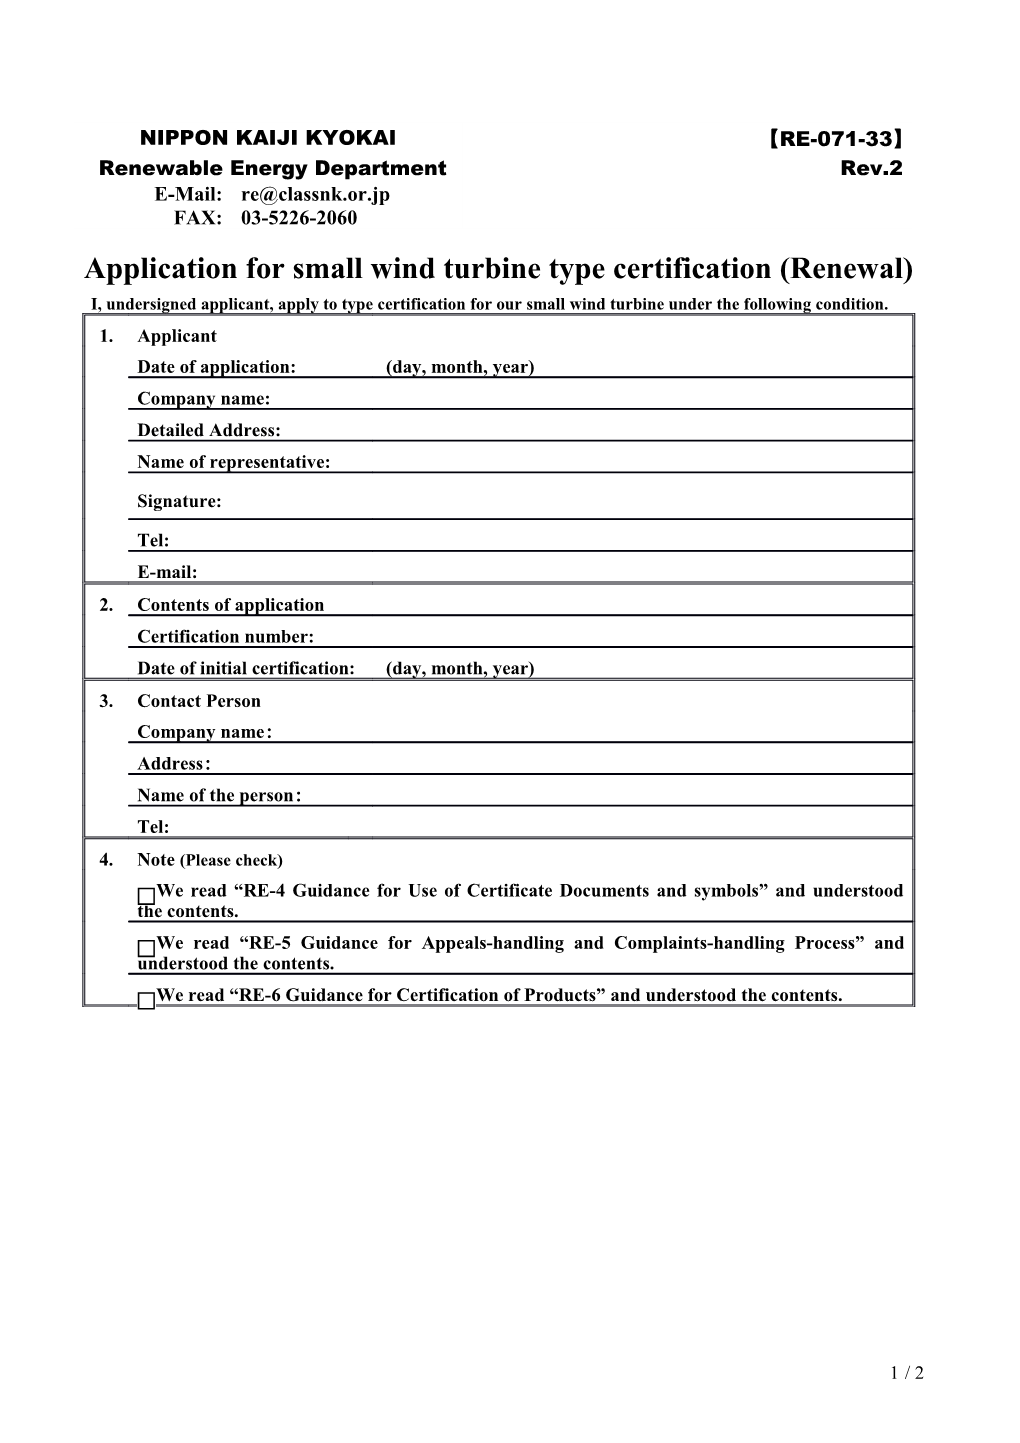 Application for Small Wind Turbine Type Certification (Renewal)